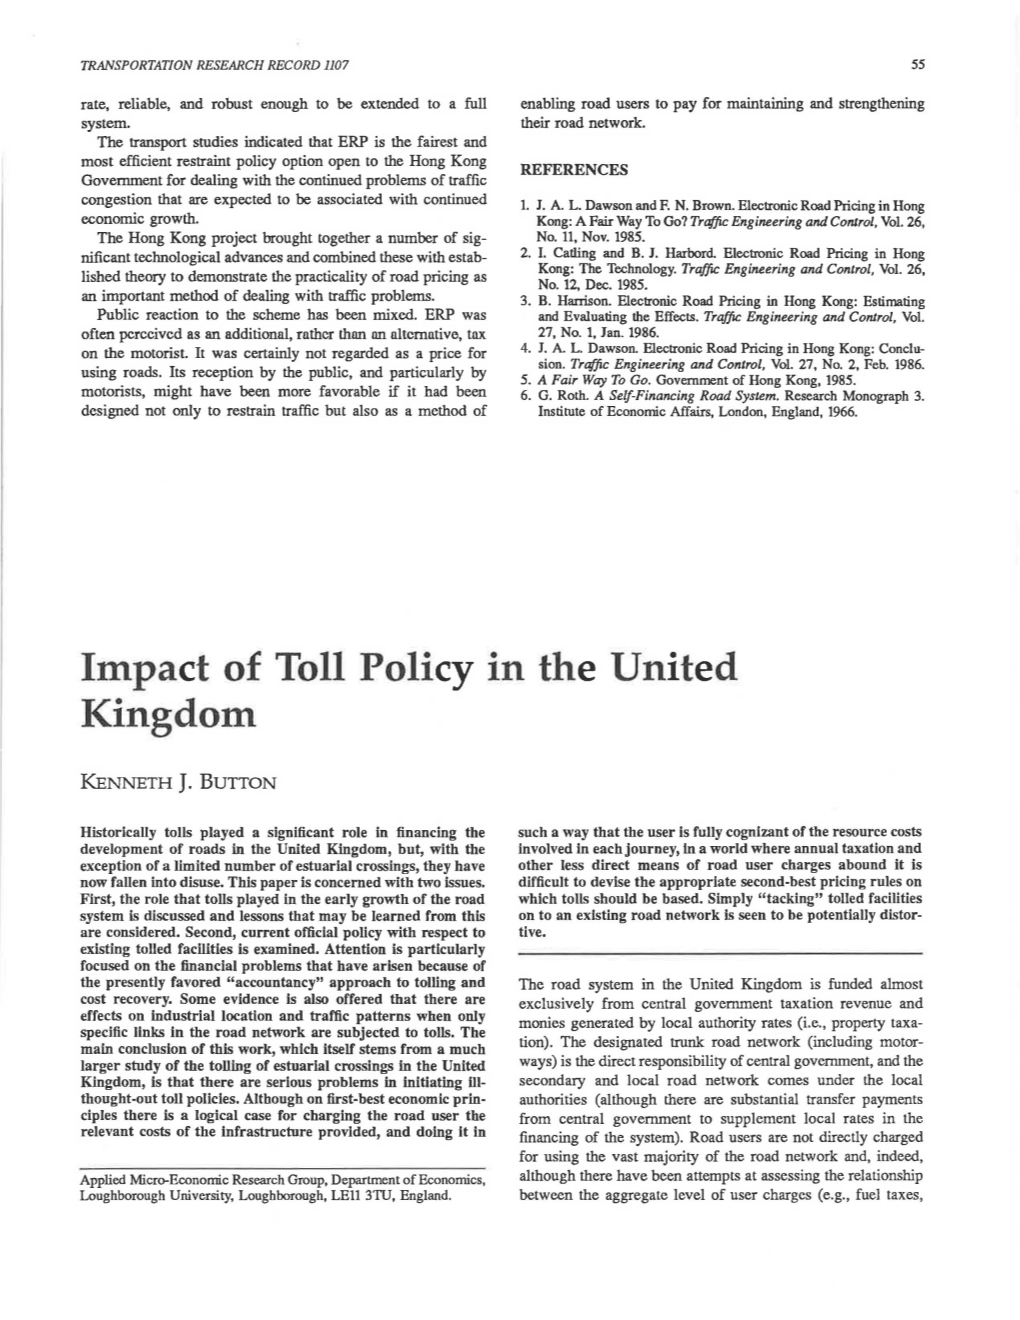 Impact of Toll Policy in the United Kingdom